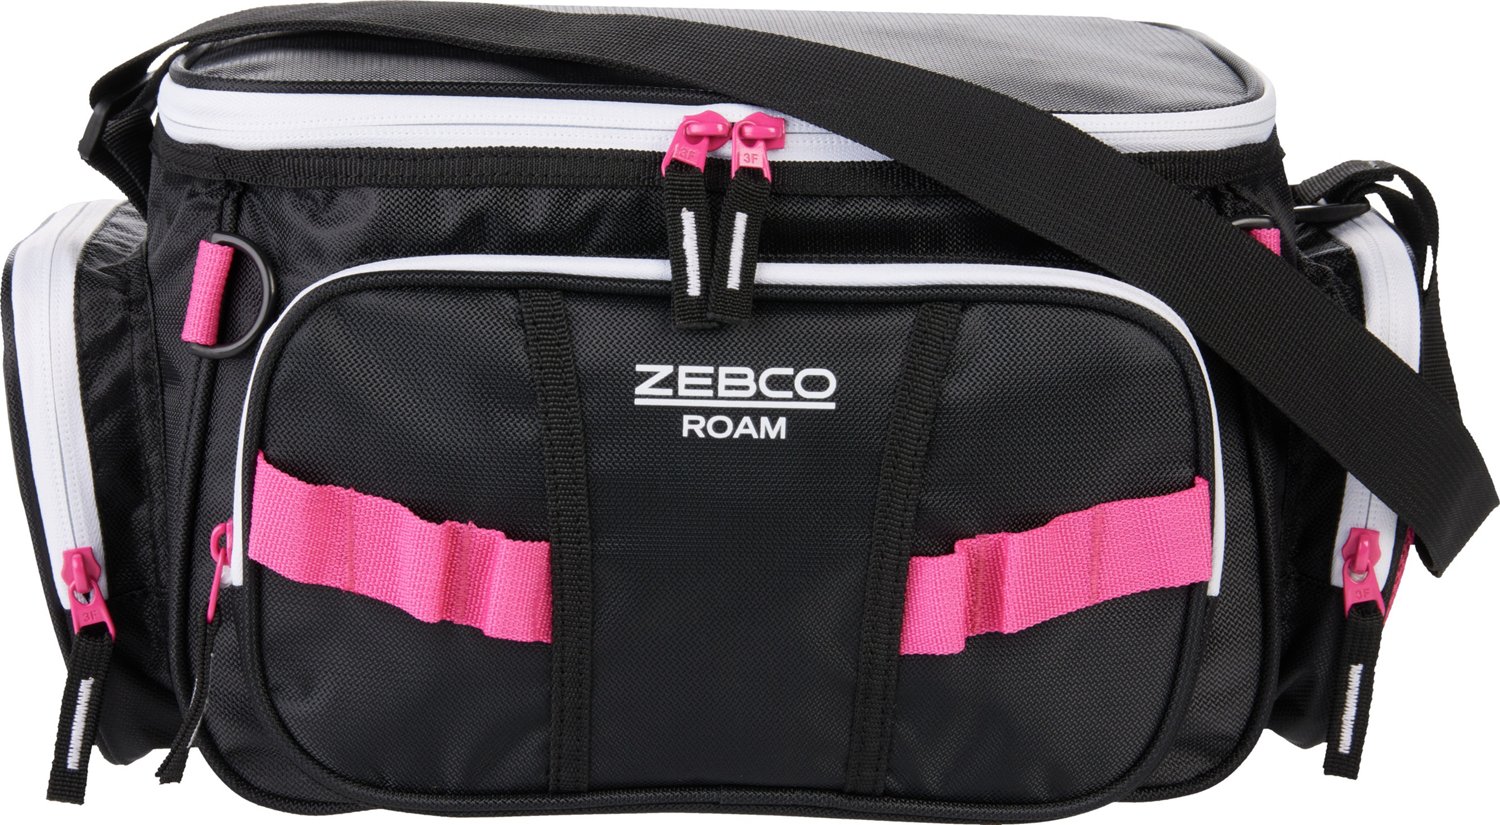 Academy Sports + Outdoors Zebco Roam Series Utility Tackle Bag